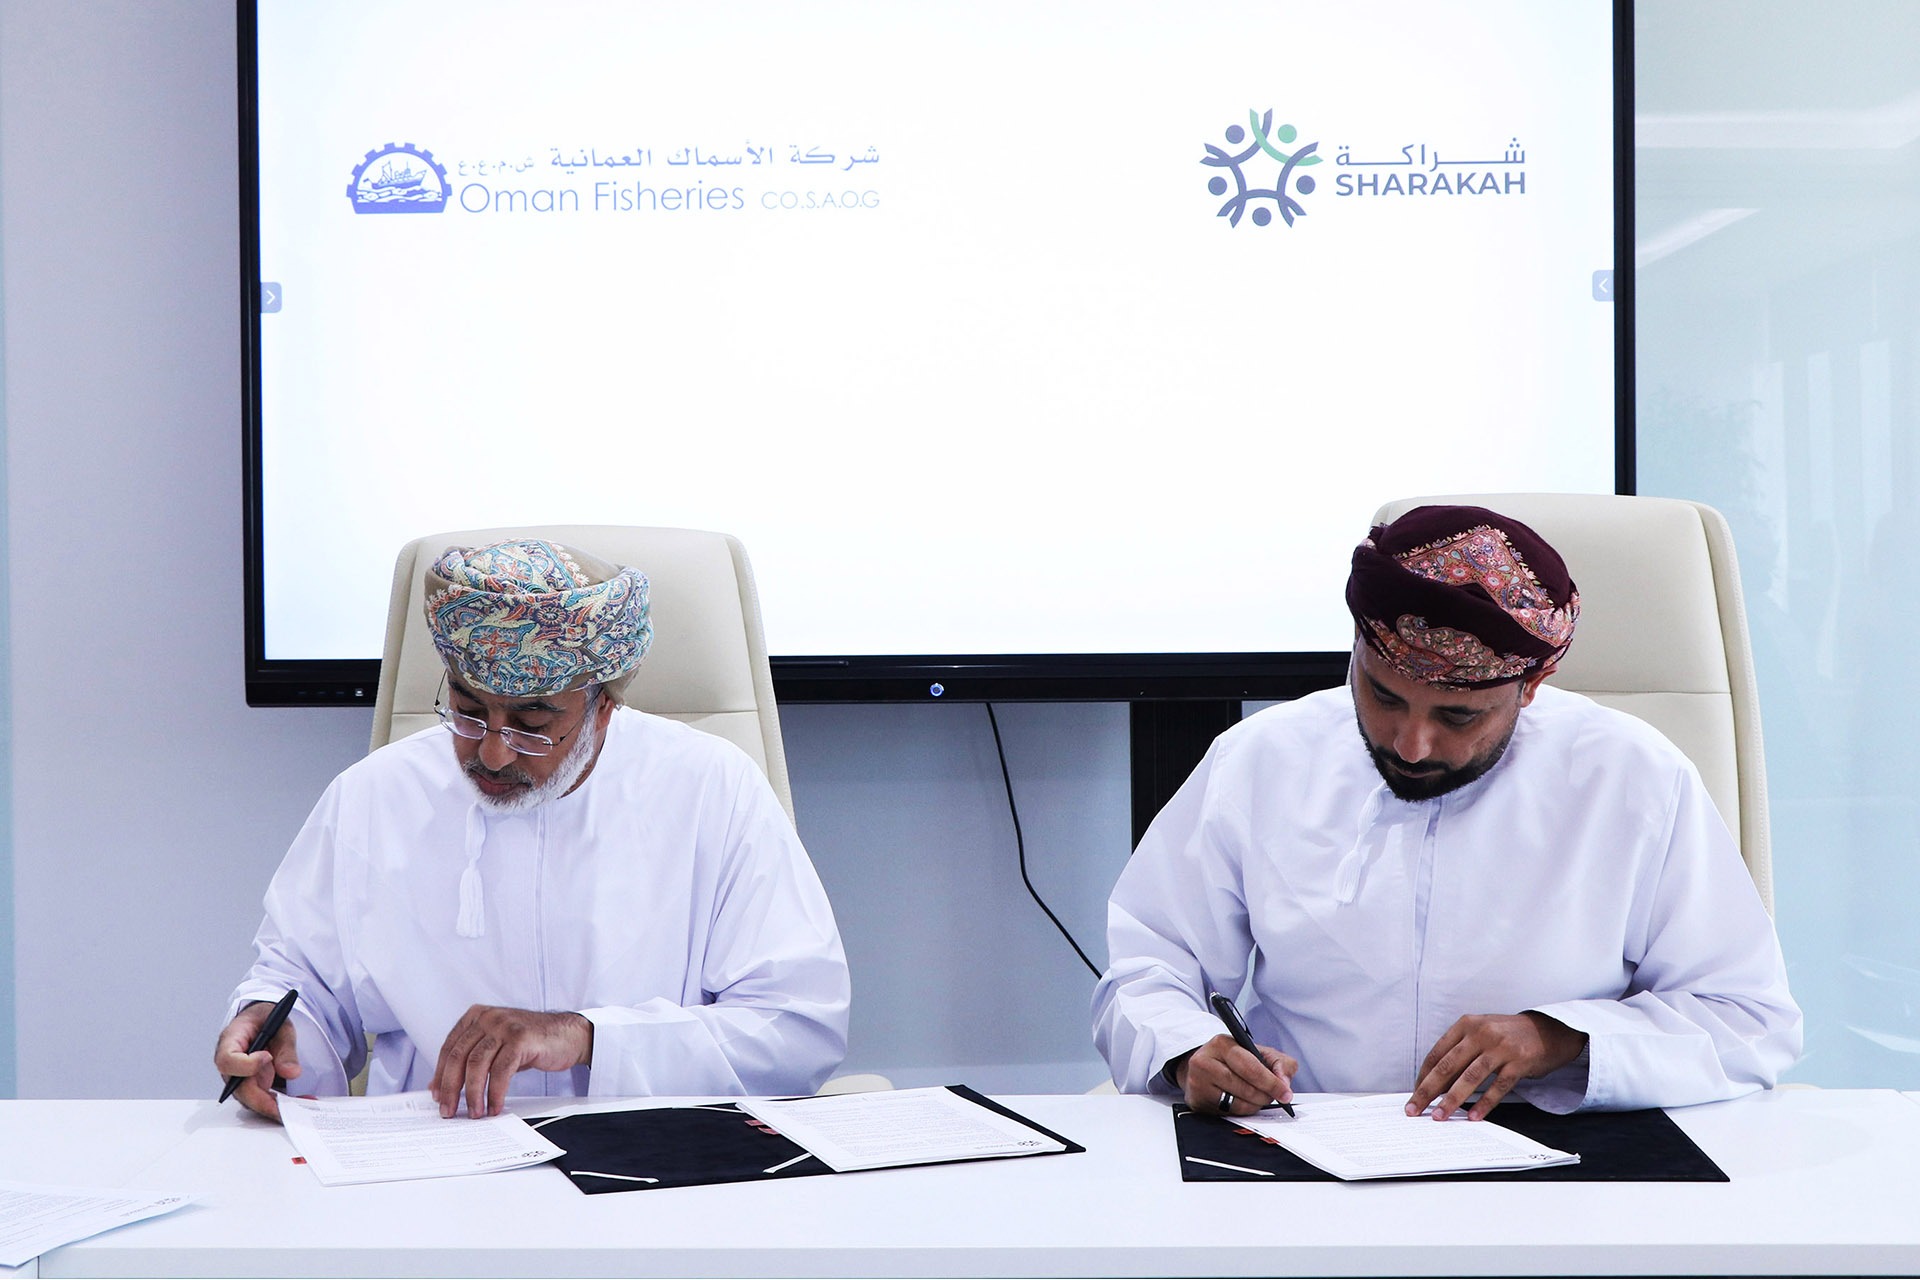 Sharakah enhances the growth of Omani SMEs through an invoice factoring partnership with Oman Fisheries